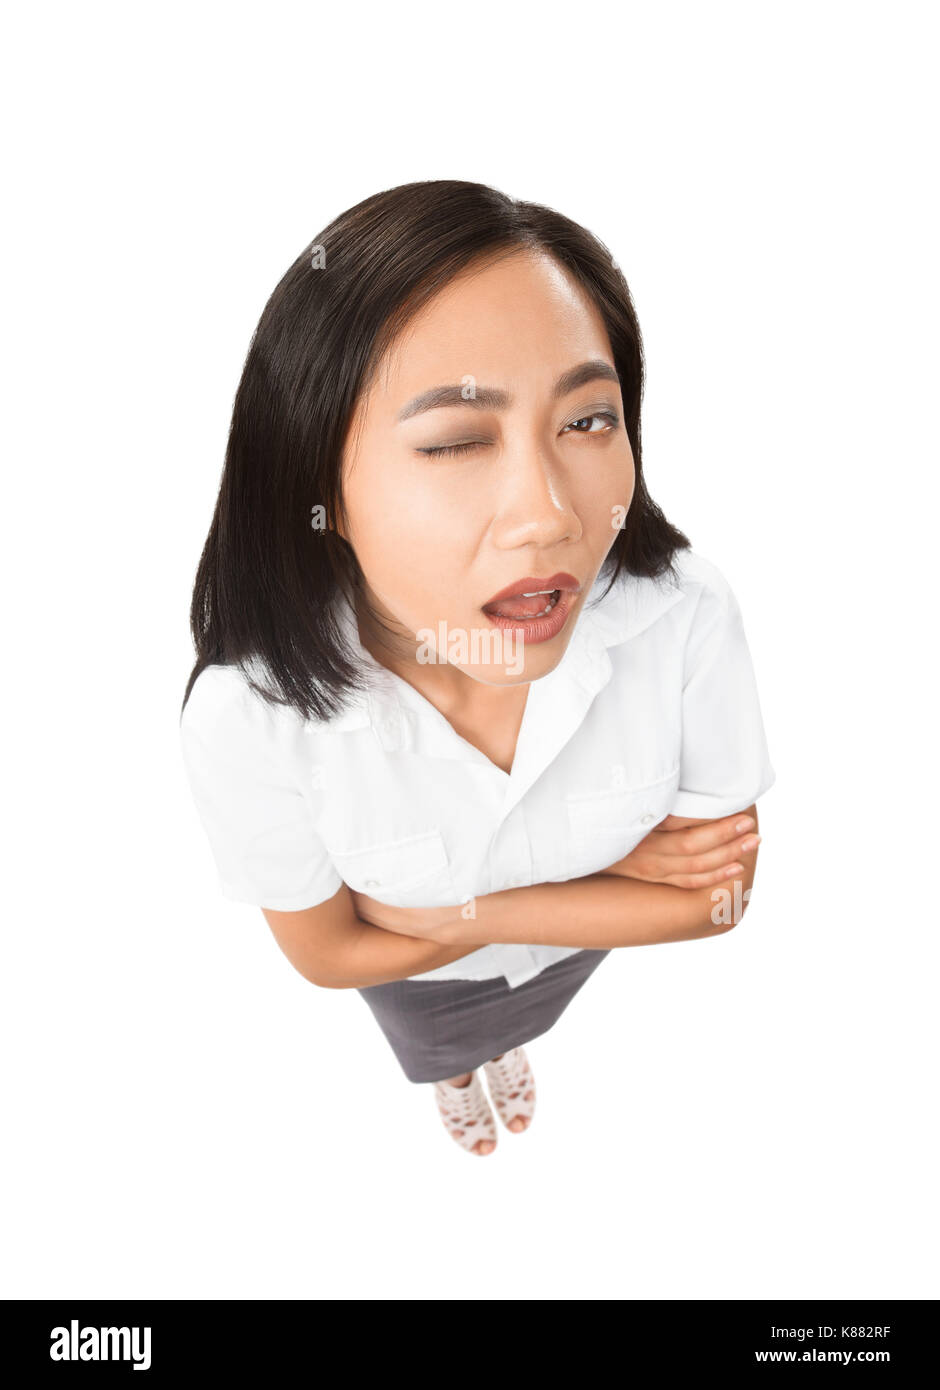 Top view portrait of Asian woman with facial expressions - apathy, fatigue, mannerisms concept. Model in full length with one closed eye and open mout Stock Photo